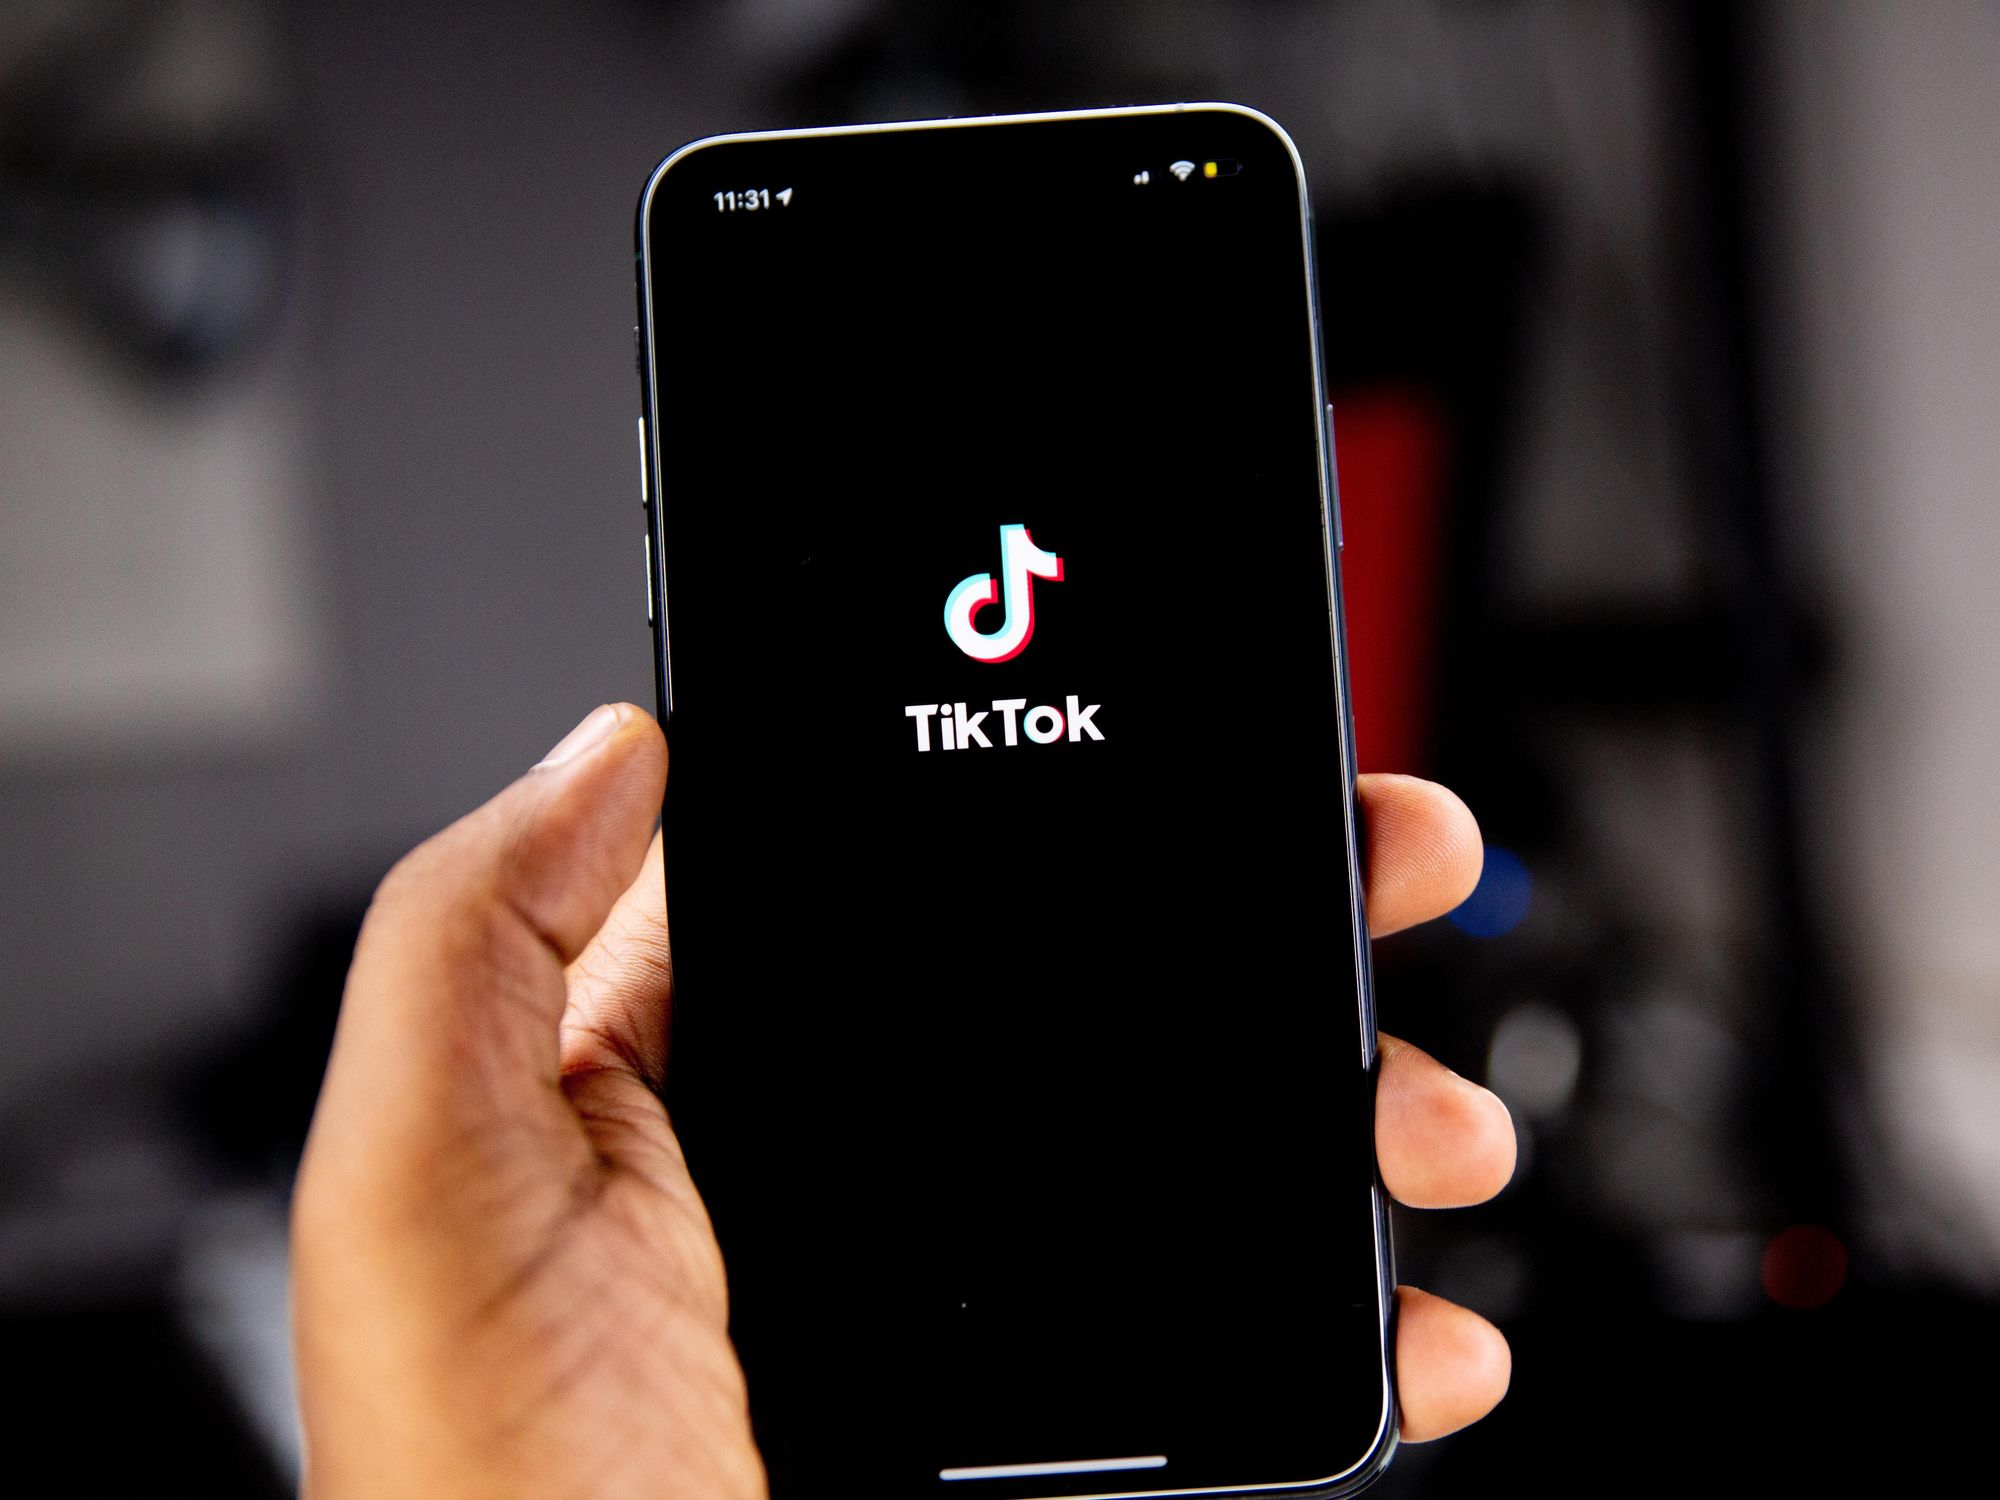 TikTok Updates Content Rules To Combat Eating Disorders, Protect LGBTQ Users